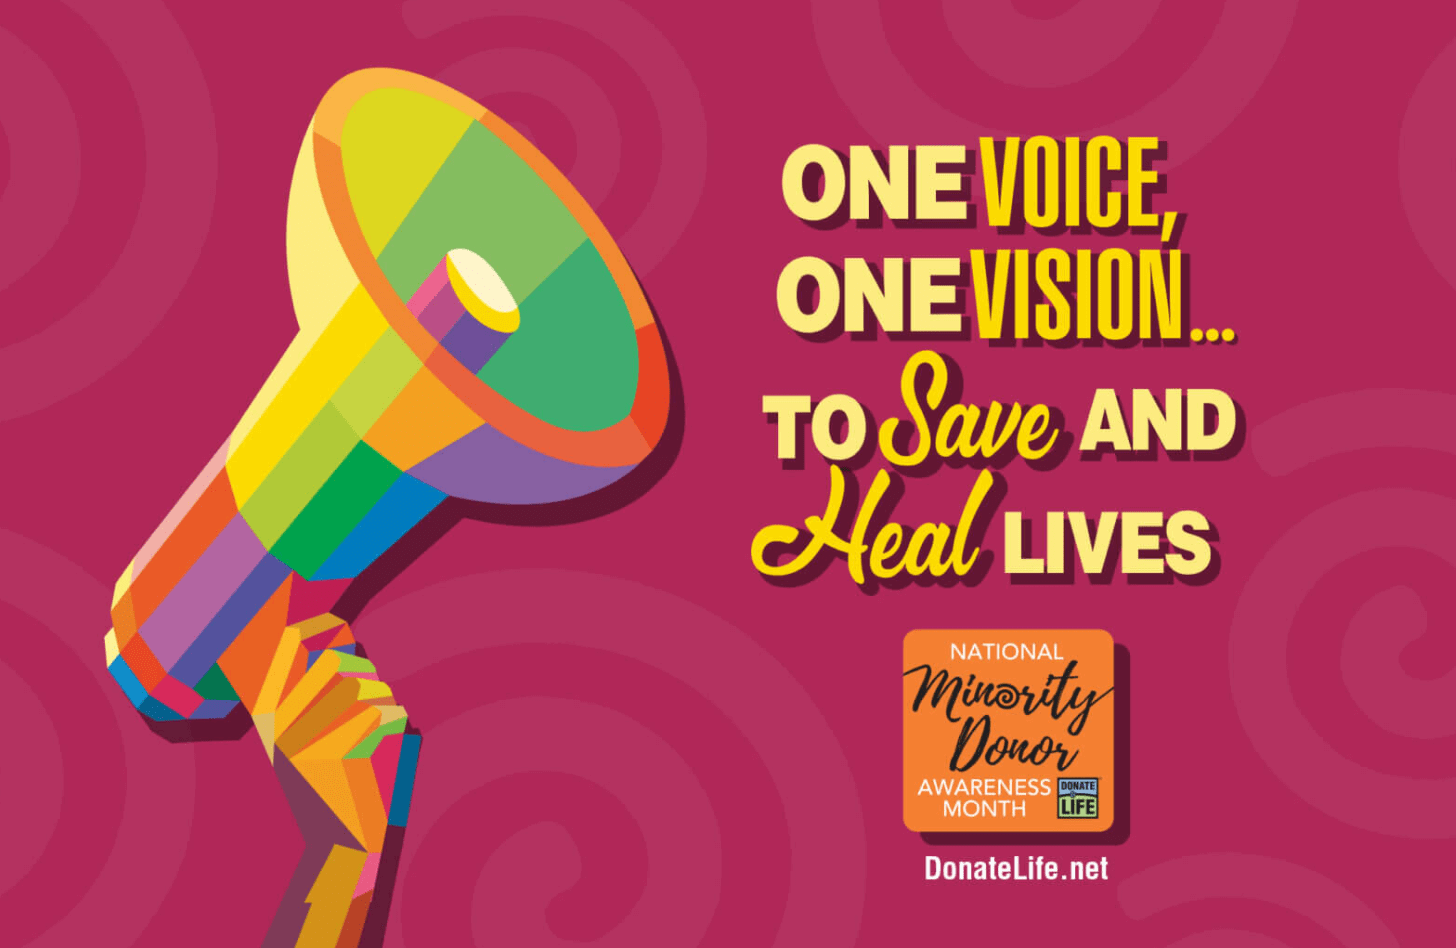 A hand holds a megaphone against a hot pink background. Yellow text reads: One voice, one vision. To save and heal lives.